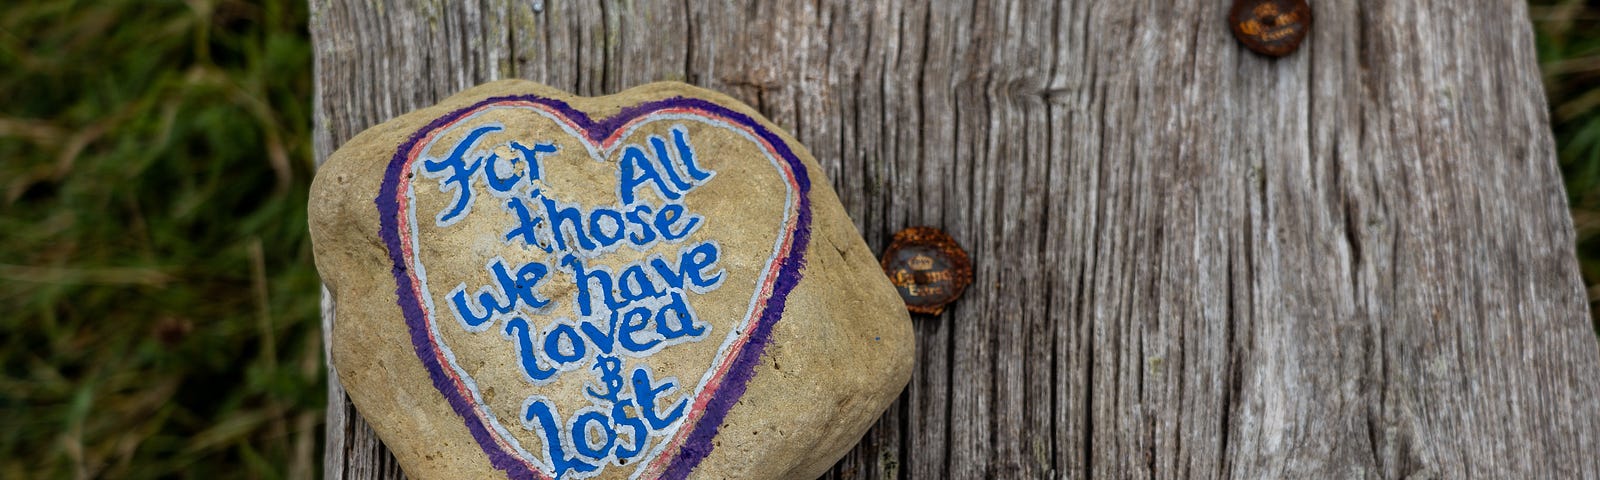 A rock sits on a rough piece of grey wood. On the rock is a painted heart and the words “For all those we have loved & lost.”